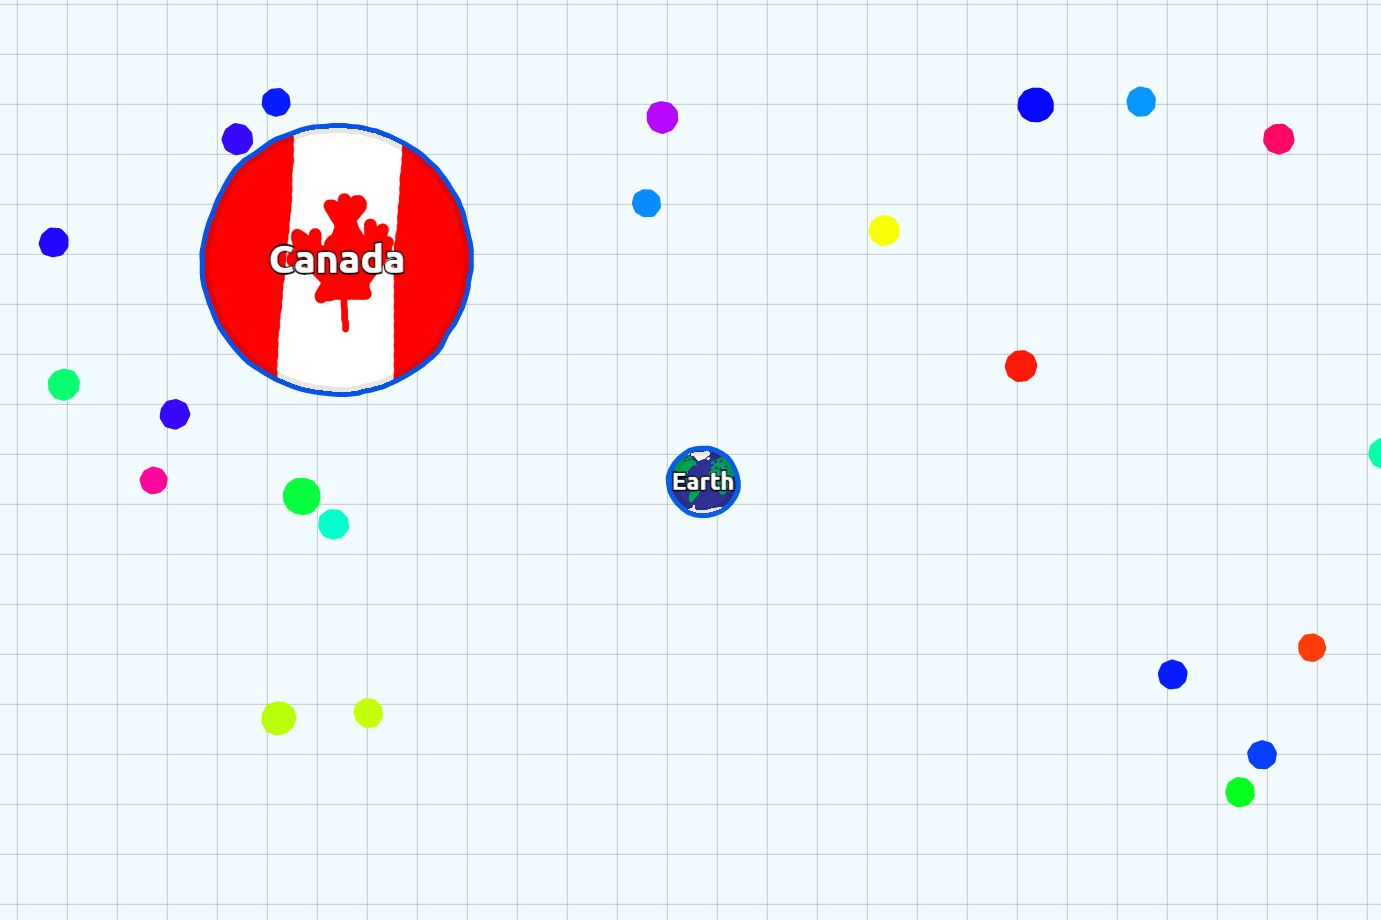 What the Heck is 'Agar.io', and Why Should You Care? – TouchArcade